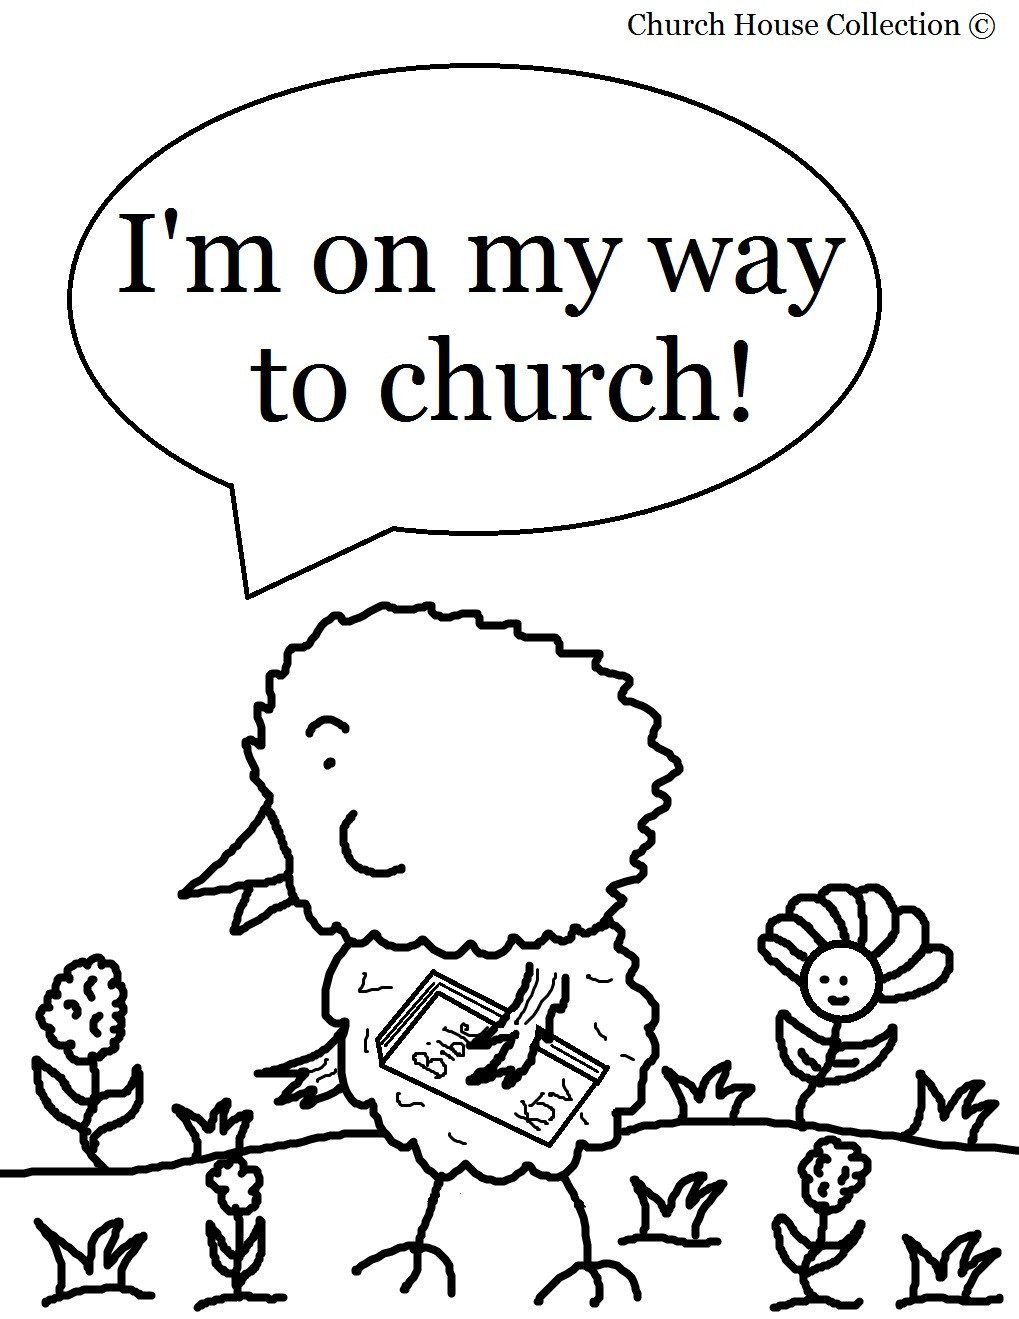 Children Sunday School Coloring Pages
 Church House Collection Blog Easter Chick Coloring Page